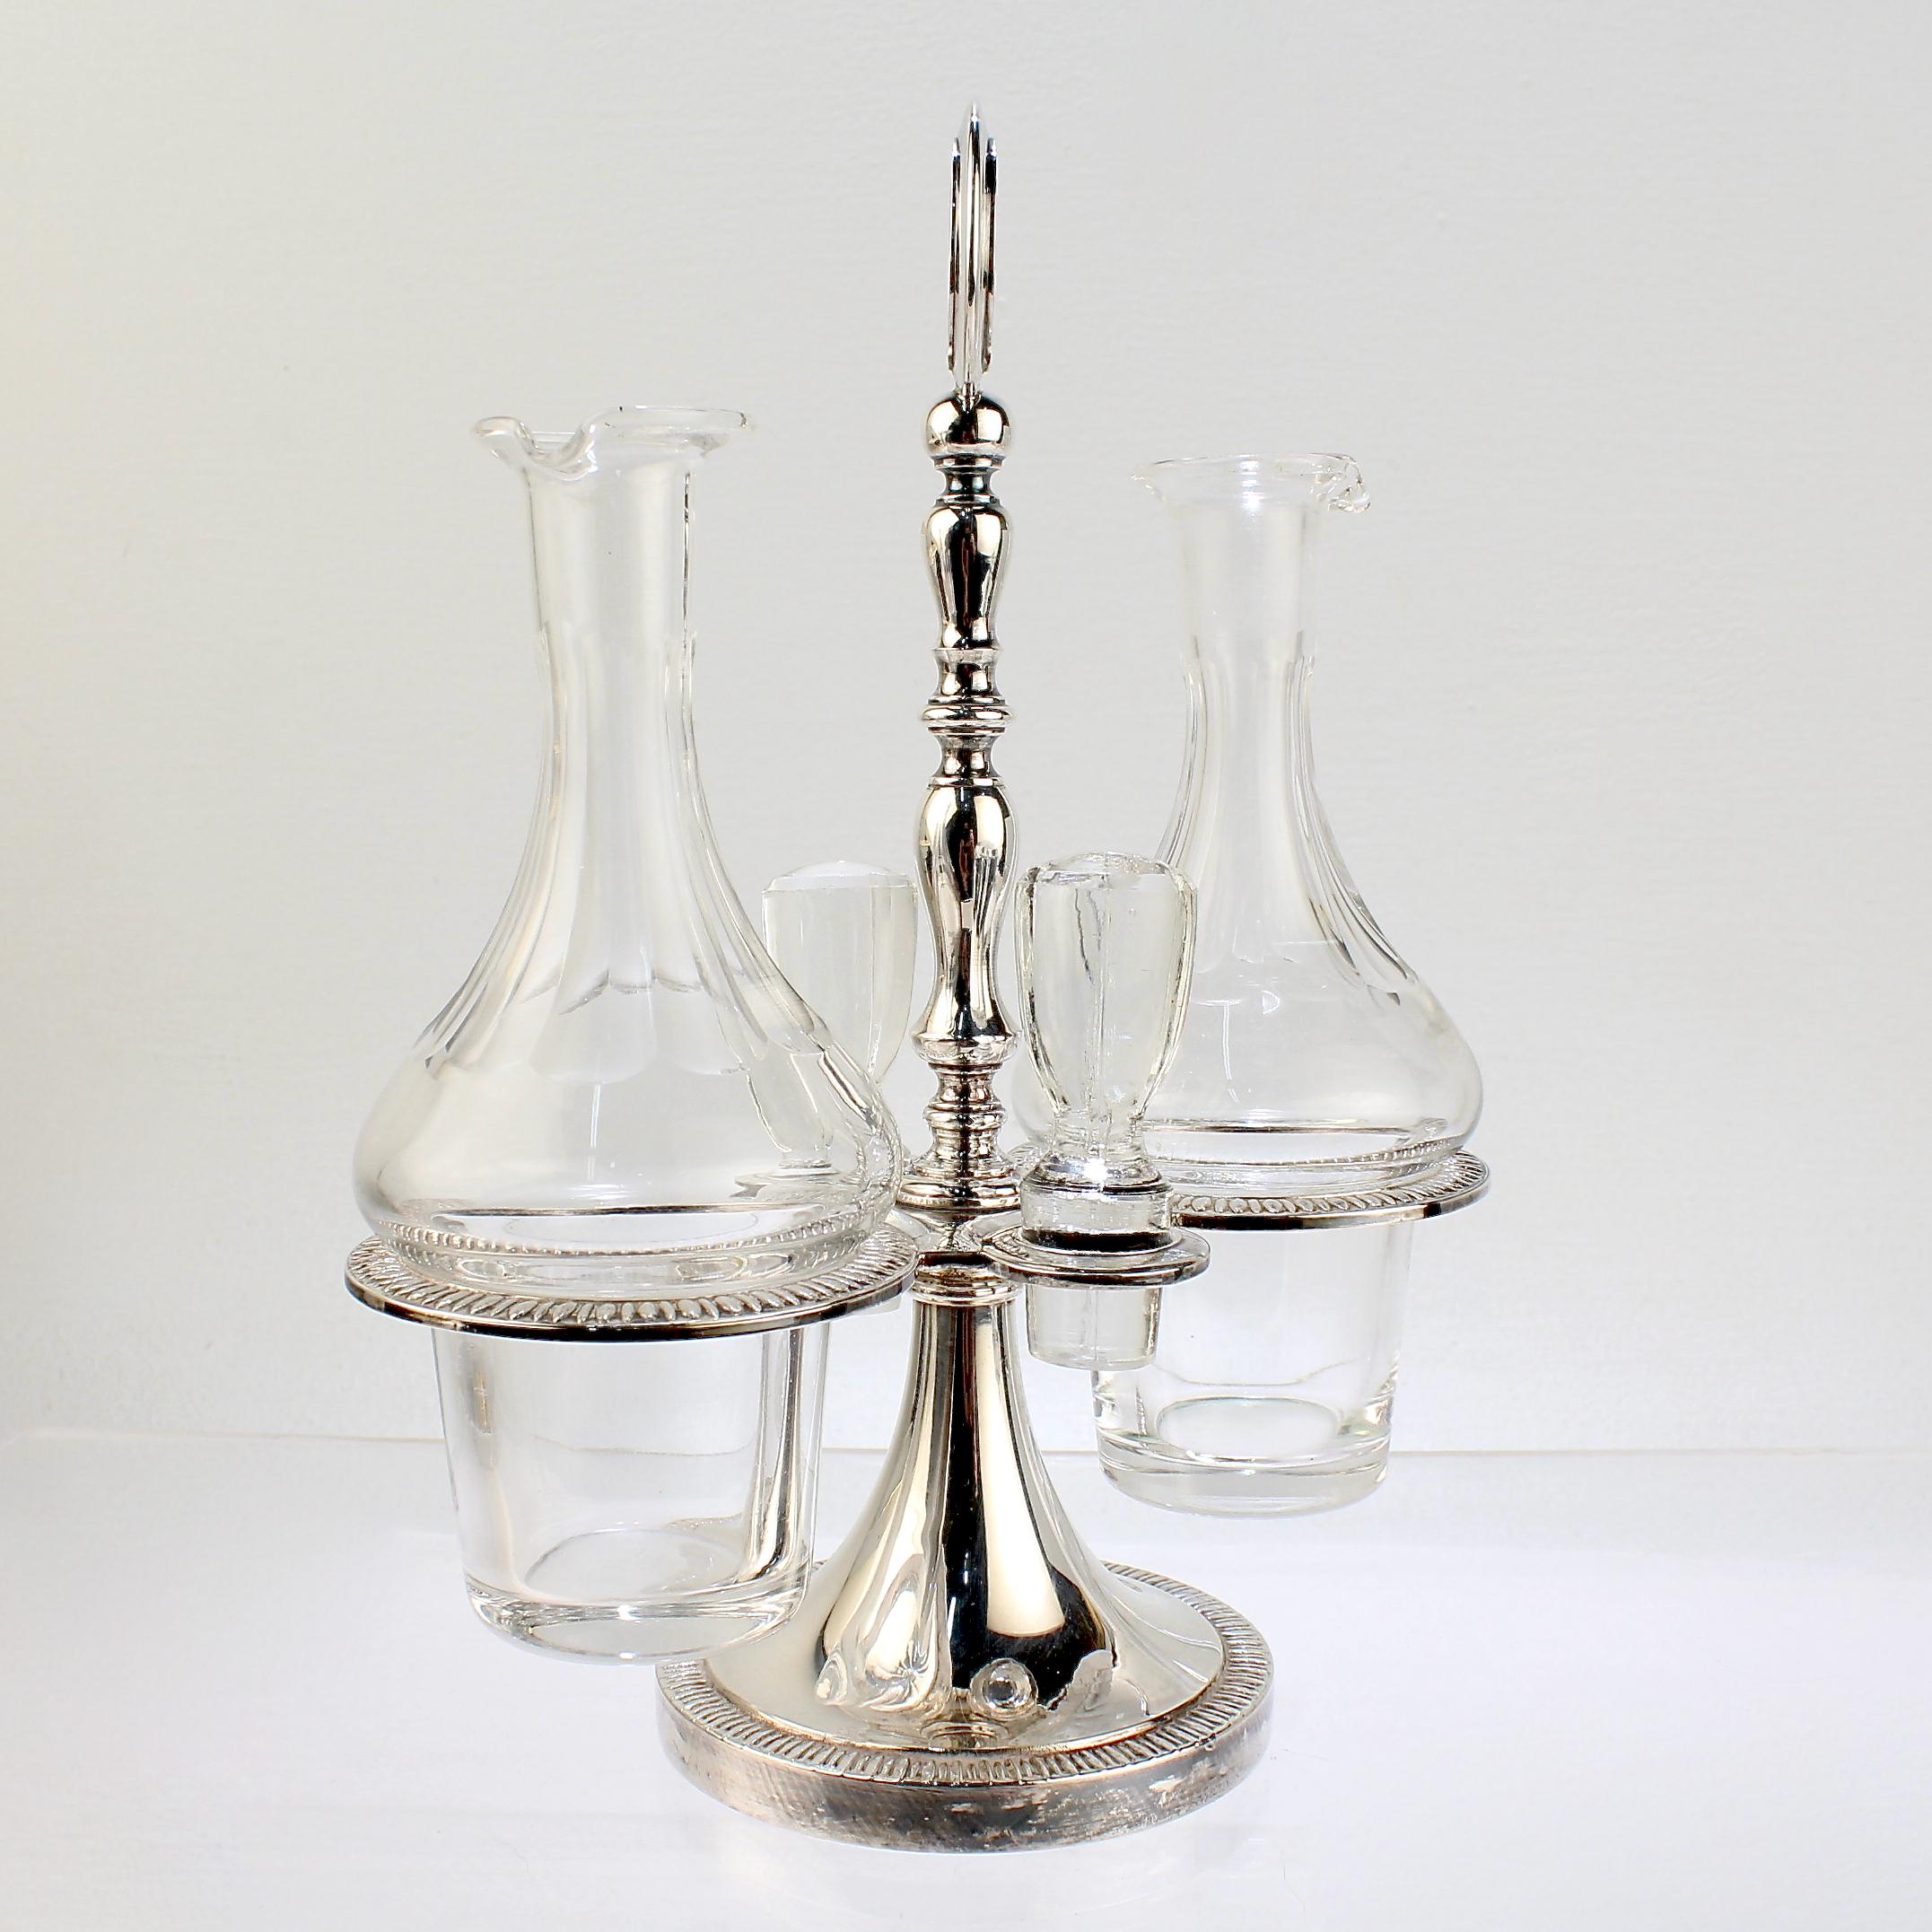 A fine silver plate and crystal cruet set.

By Israel Freeman.

Consisting of 2 cut glass bottles with conforming stoppers and a silver plated base with a rotating holder for the bottles.

Simply a wonderful cruet stand! 

Date:
20th